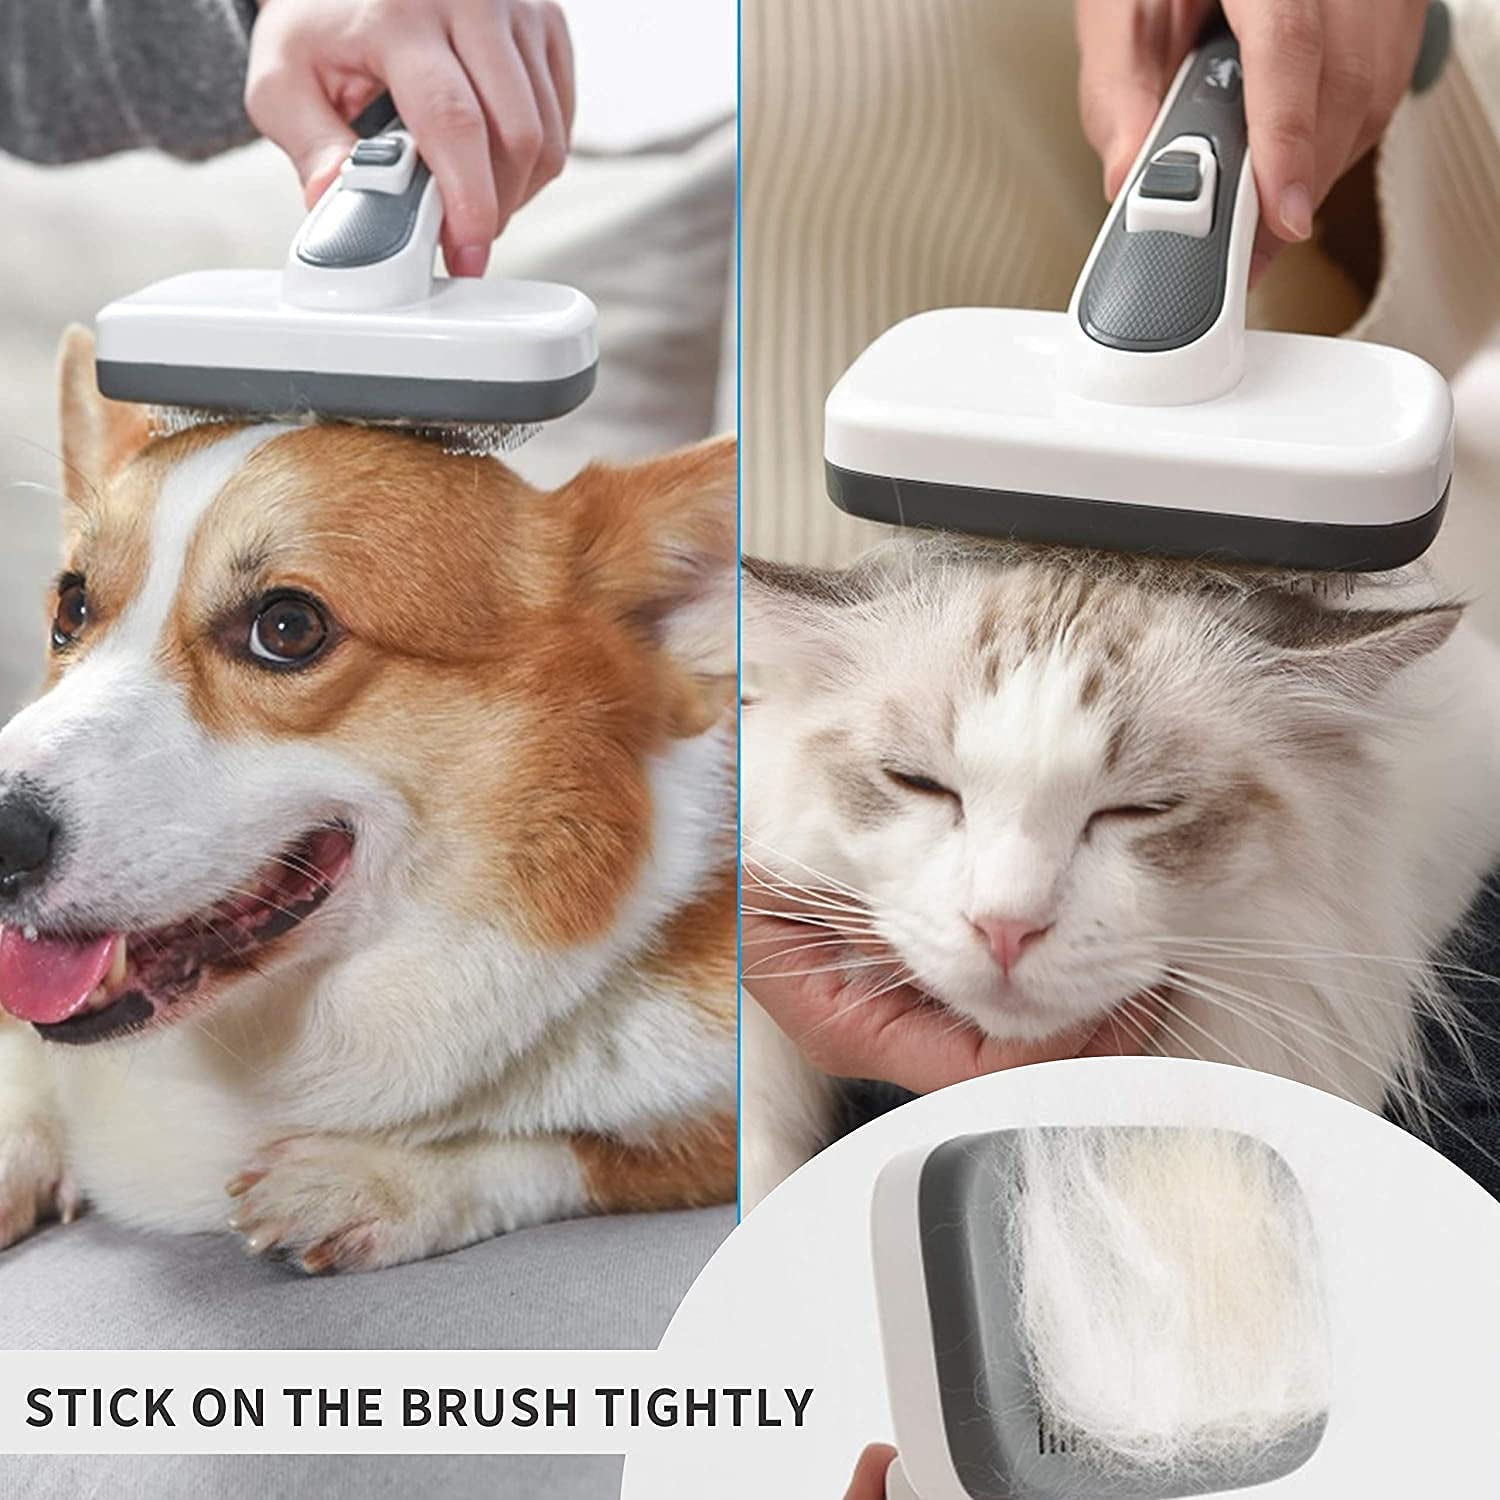 Self Cleaning Slicker Brush for Dogs - Pet Grooming Brush for Shedding, Dog Brush for Long and Short Hair to Removes Tangles and Loose Hair, the Pet Hair Brush Suitable for Cats and Dogs (Gra